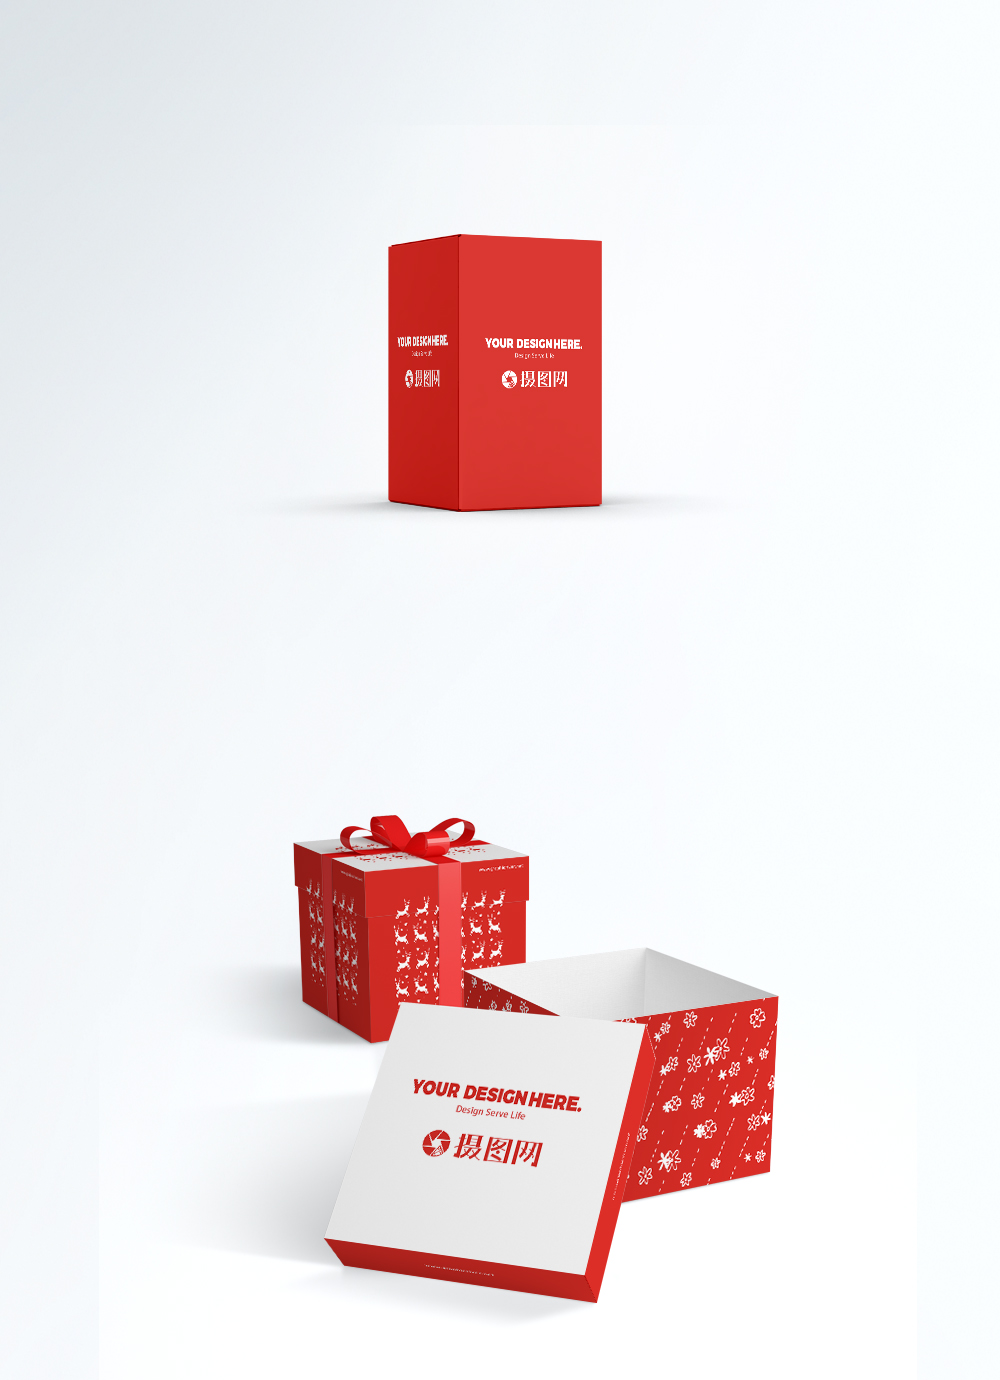 Download Box Packaging Mockup Template Image Picture Free Download 400781285 Lovepik Com PSD Mockup Templates